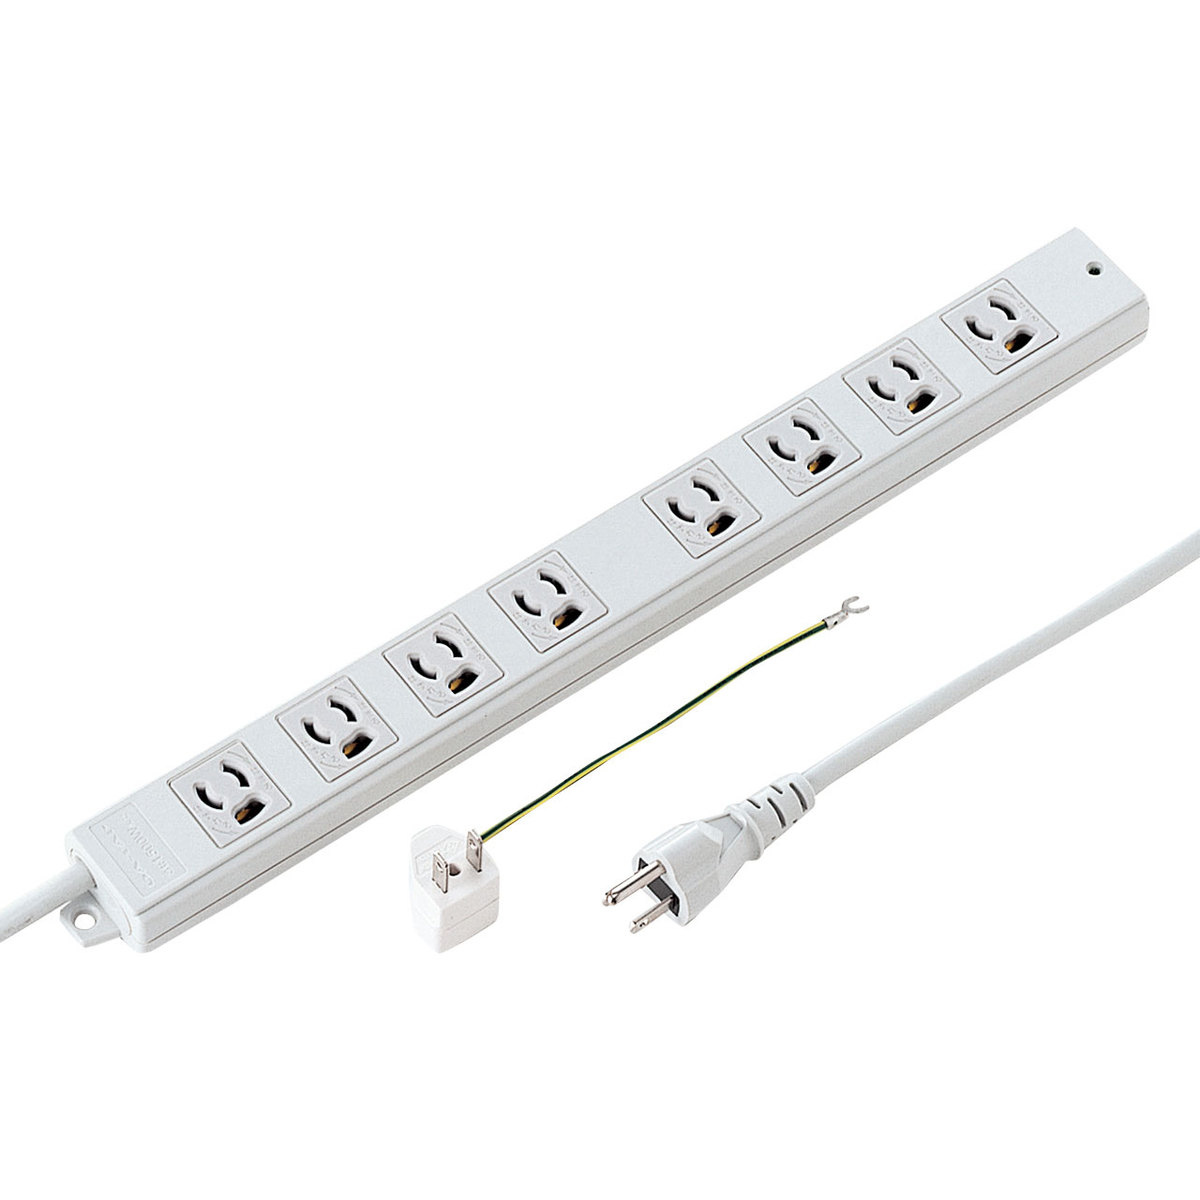 8-Outlet Removal Prevention Type Power Strip (Line Type Basic Model) TAP-MG3811N